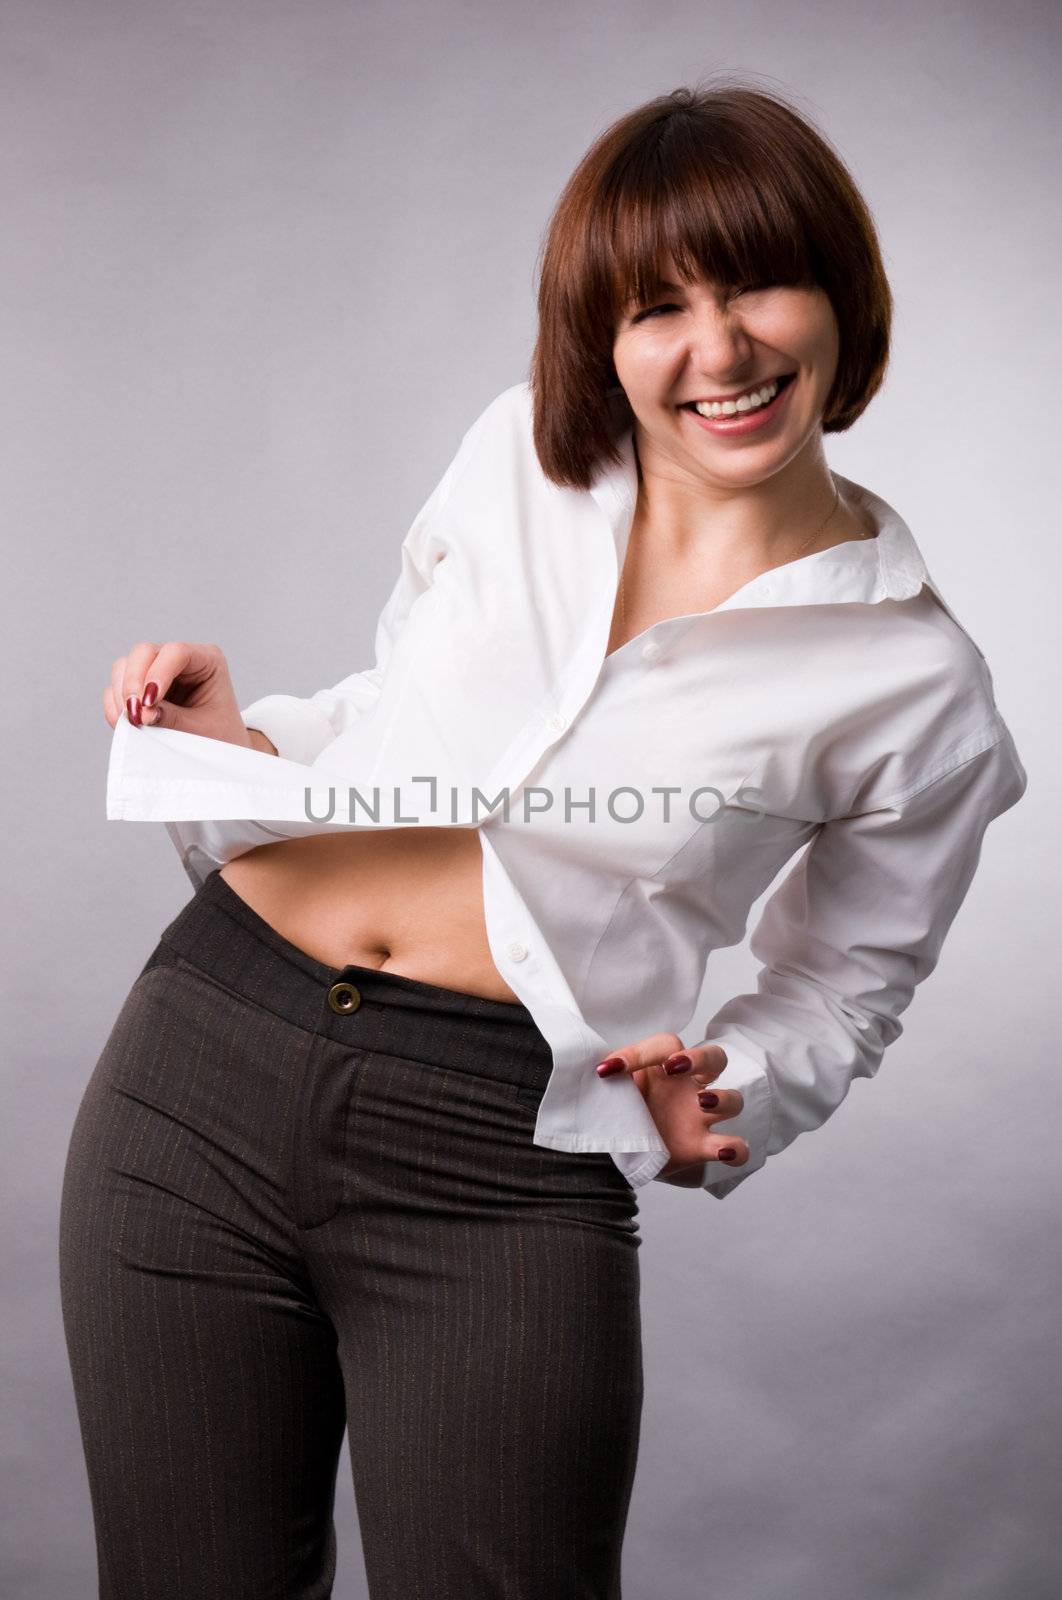 The woman in a white shirt on a grey background